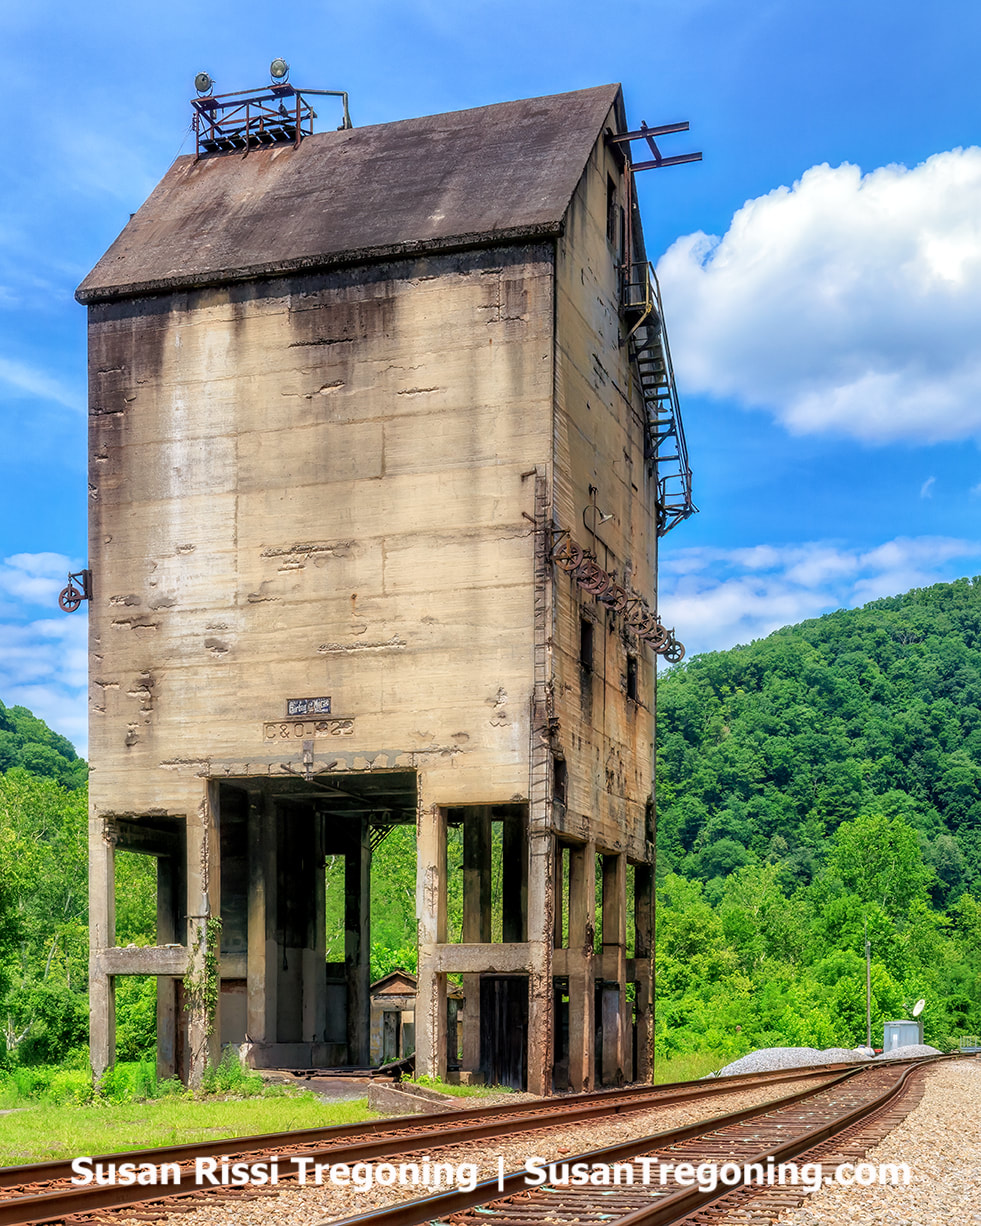 The 1920s Coaling Tower is one of the important historic structures in the ghost town of Thurmond, West Virginia. 